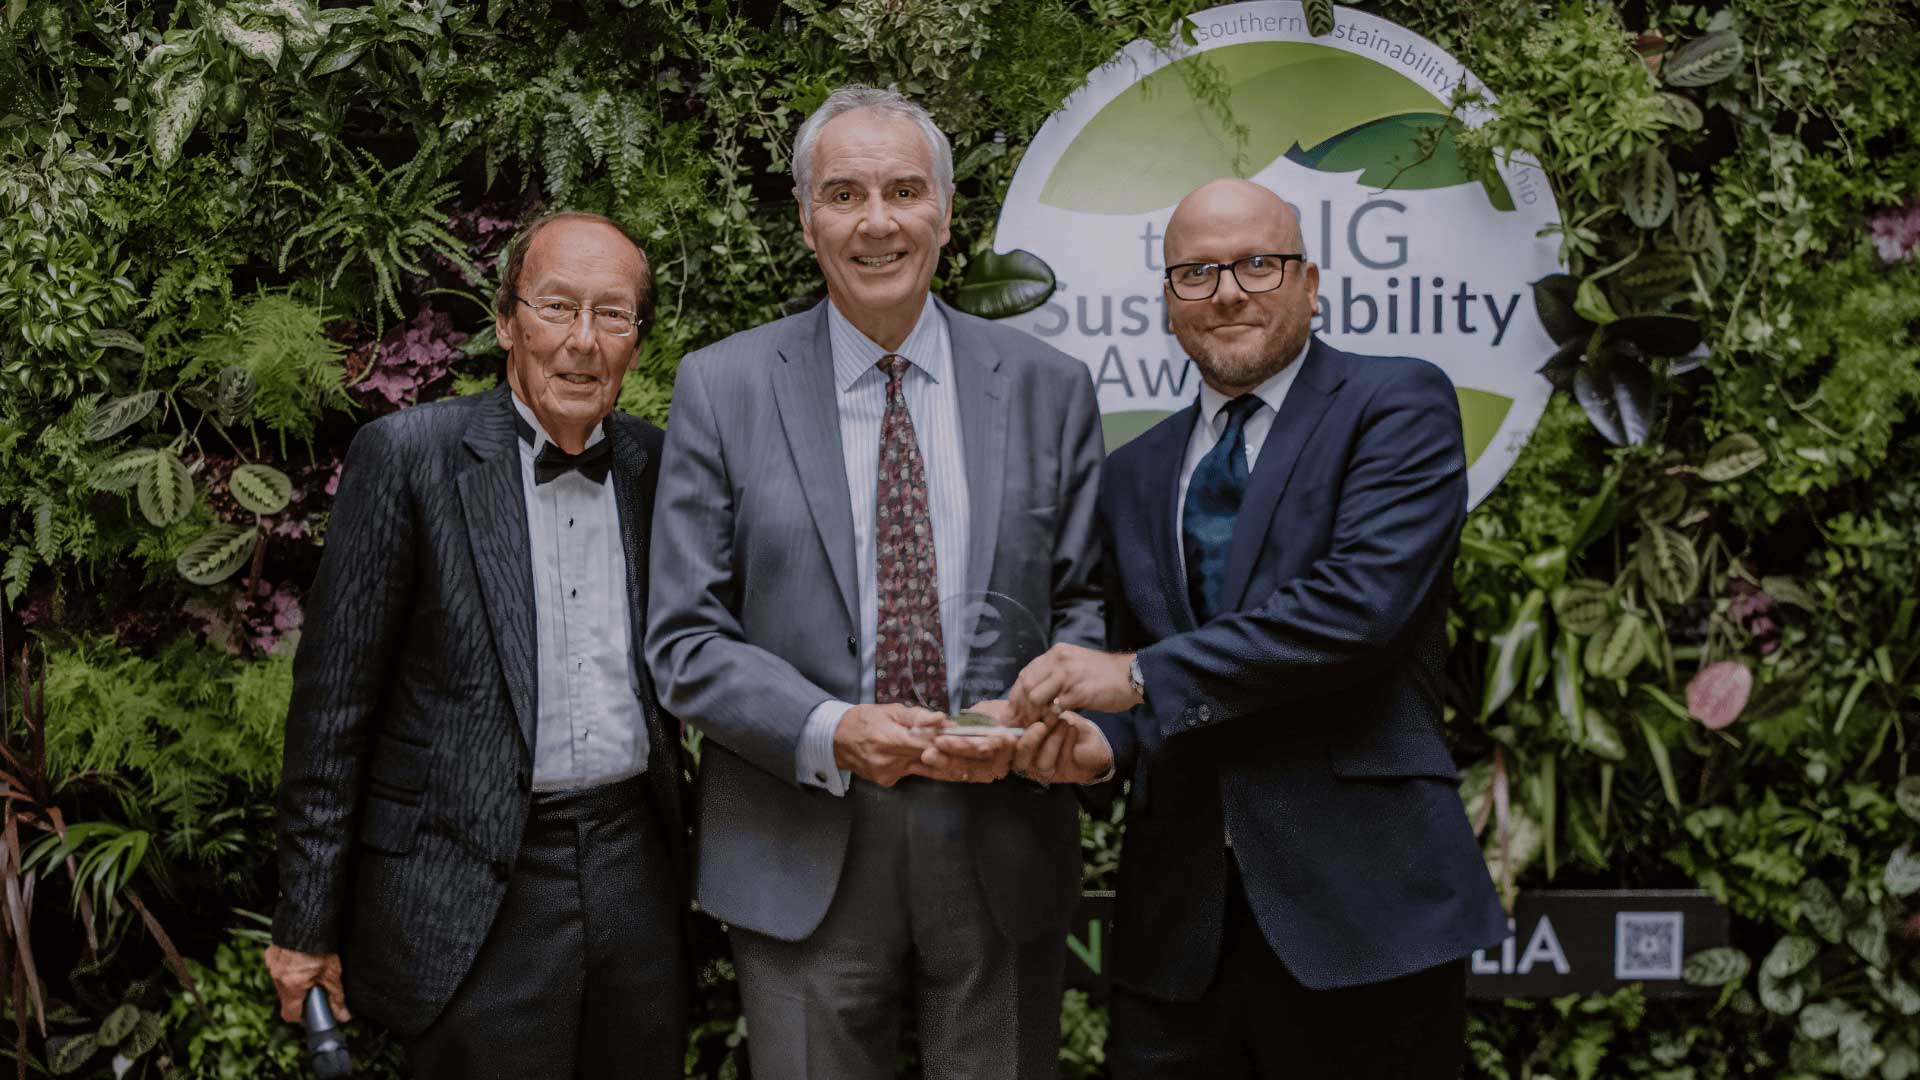 IAG Win at The Big Sustainability Awards: Communicating Your Sustainability Project